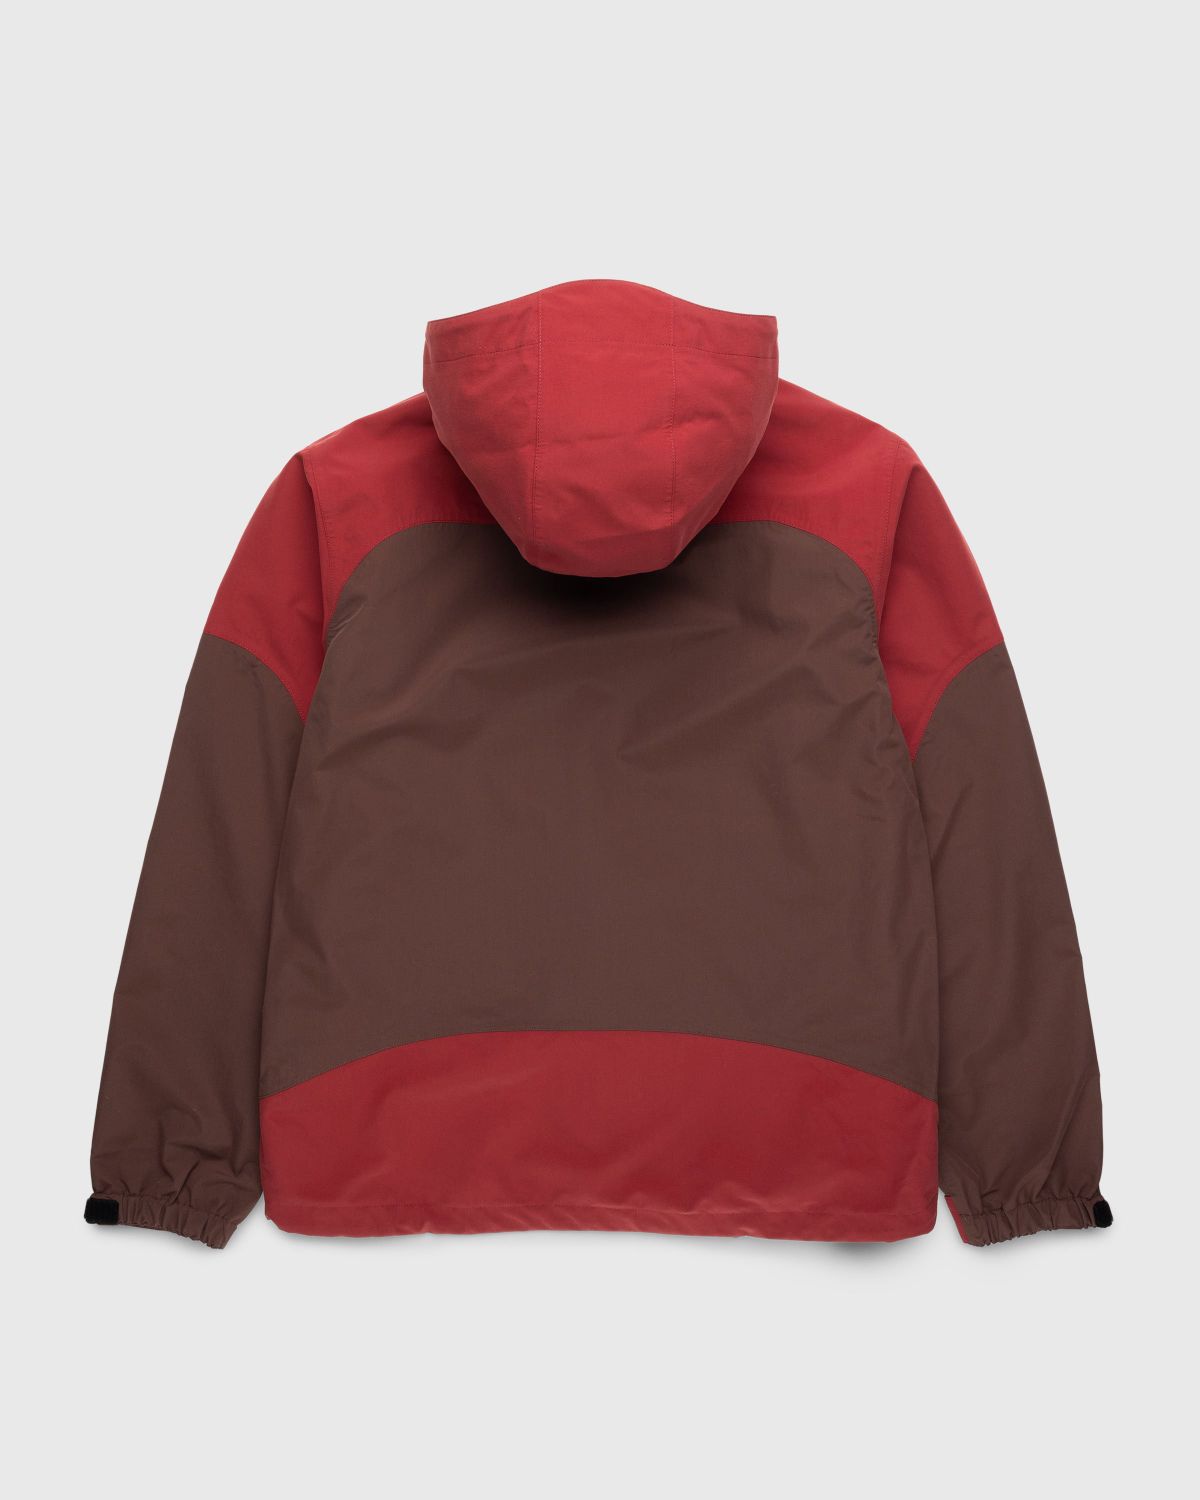 Highsnobiety HS05 – 3 Layer Taped Nylon Jacket Ruby - Outerwear - Red - Image 2